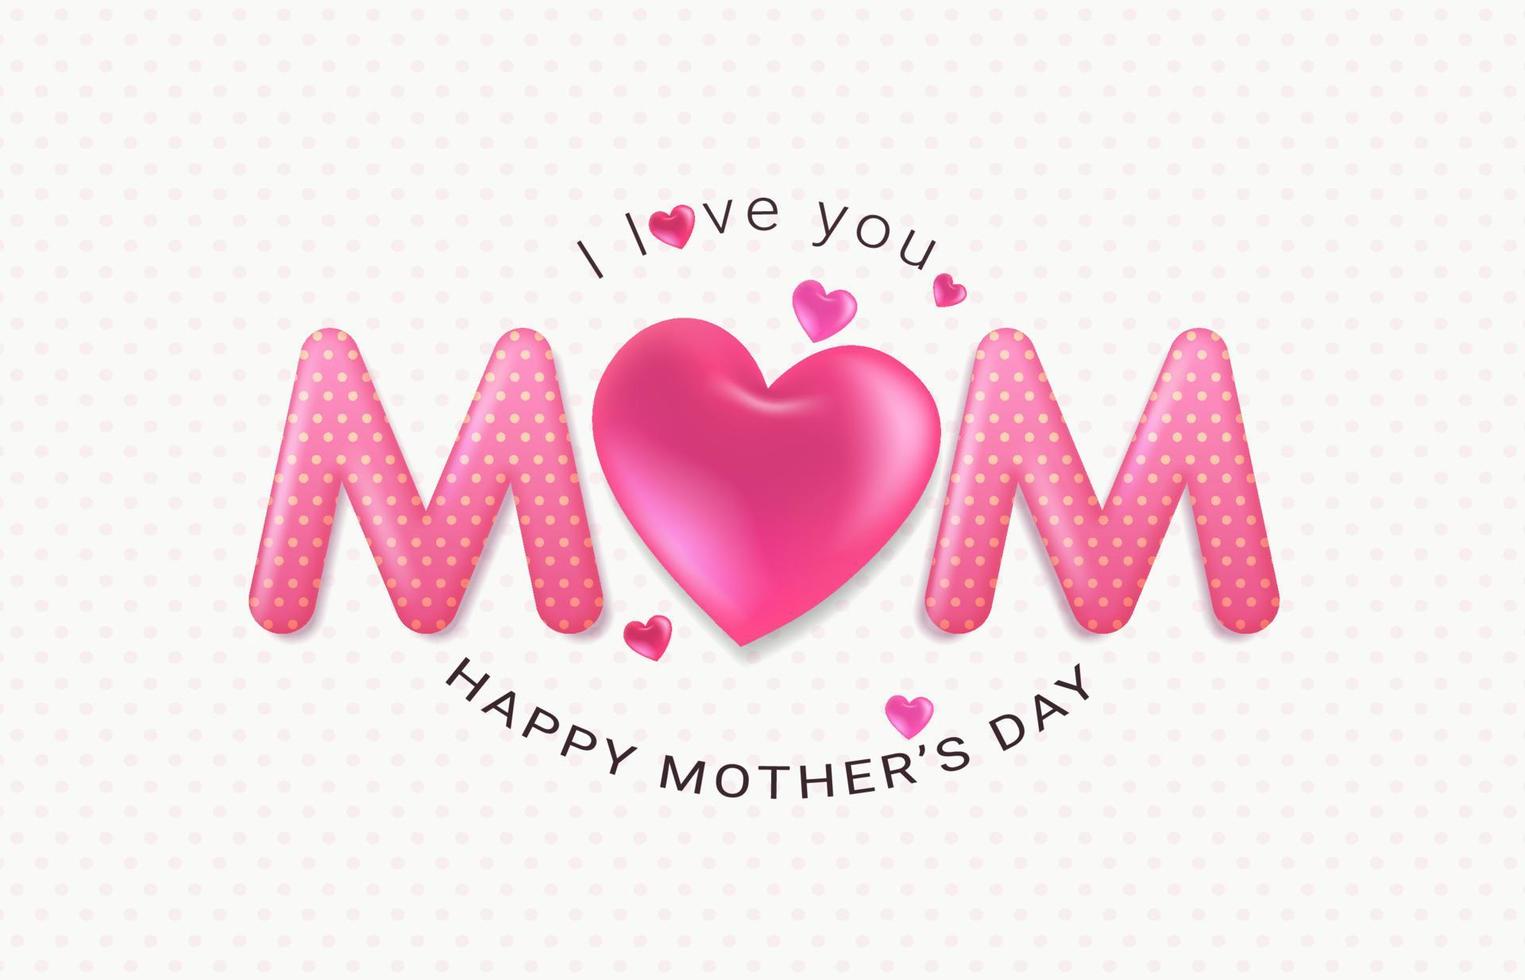 Happy mothers day greeting card and banner with 3d hearts and Mom font design on a white background with pink polka dots. I love you mom. Template for International Mother's Day. vector